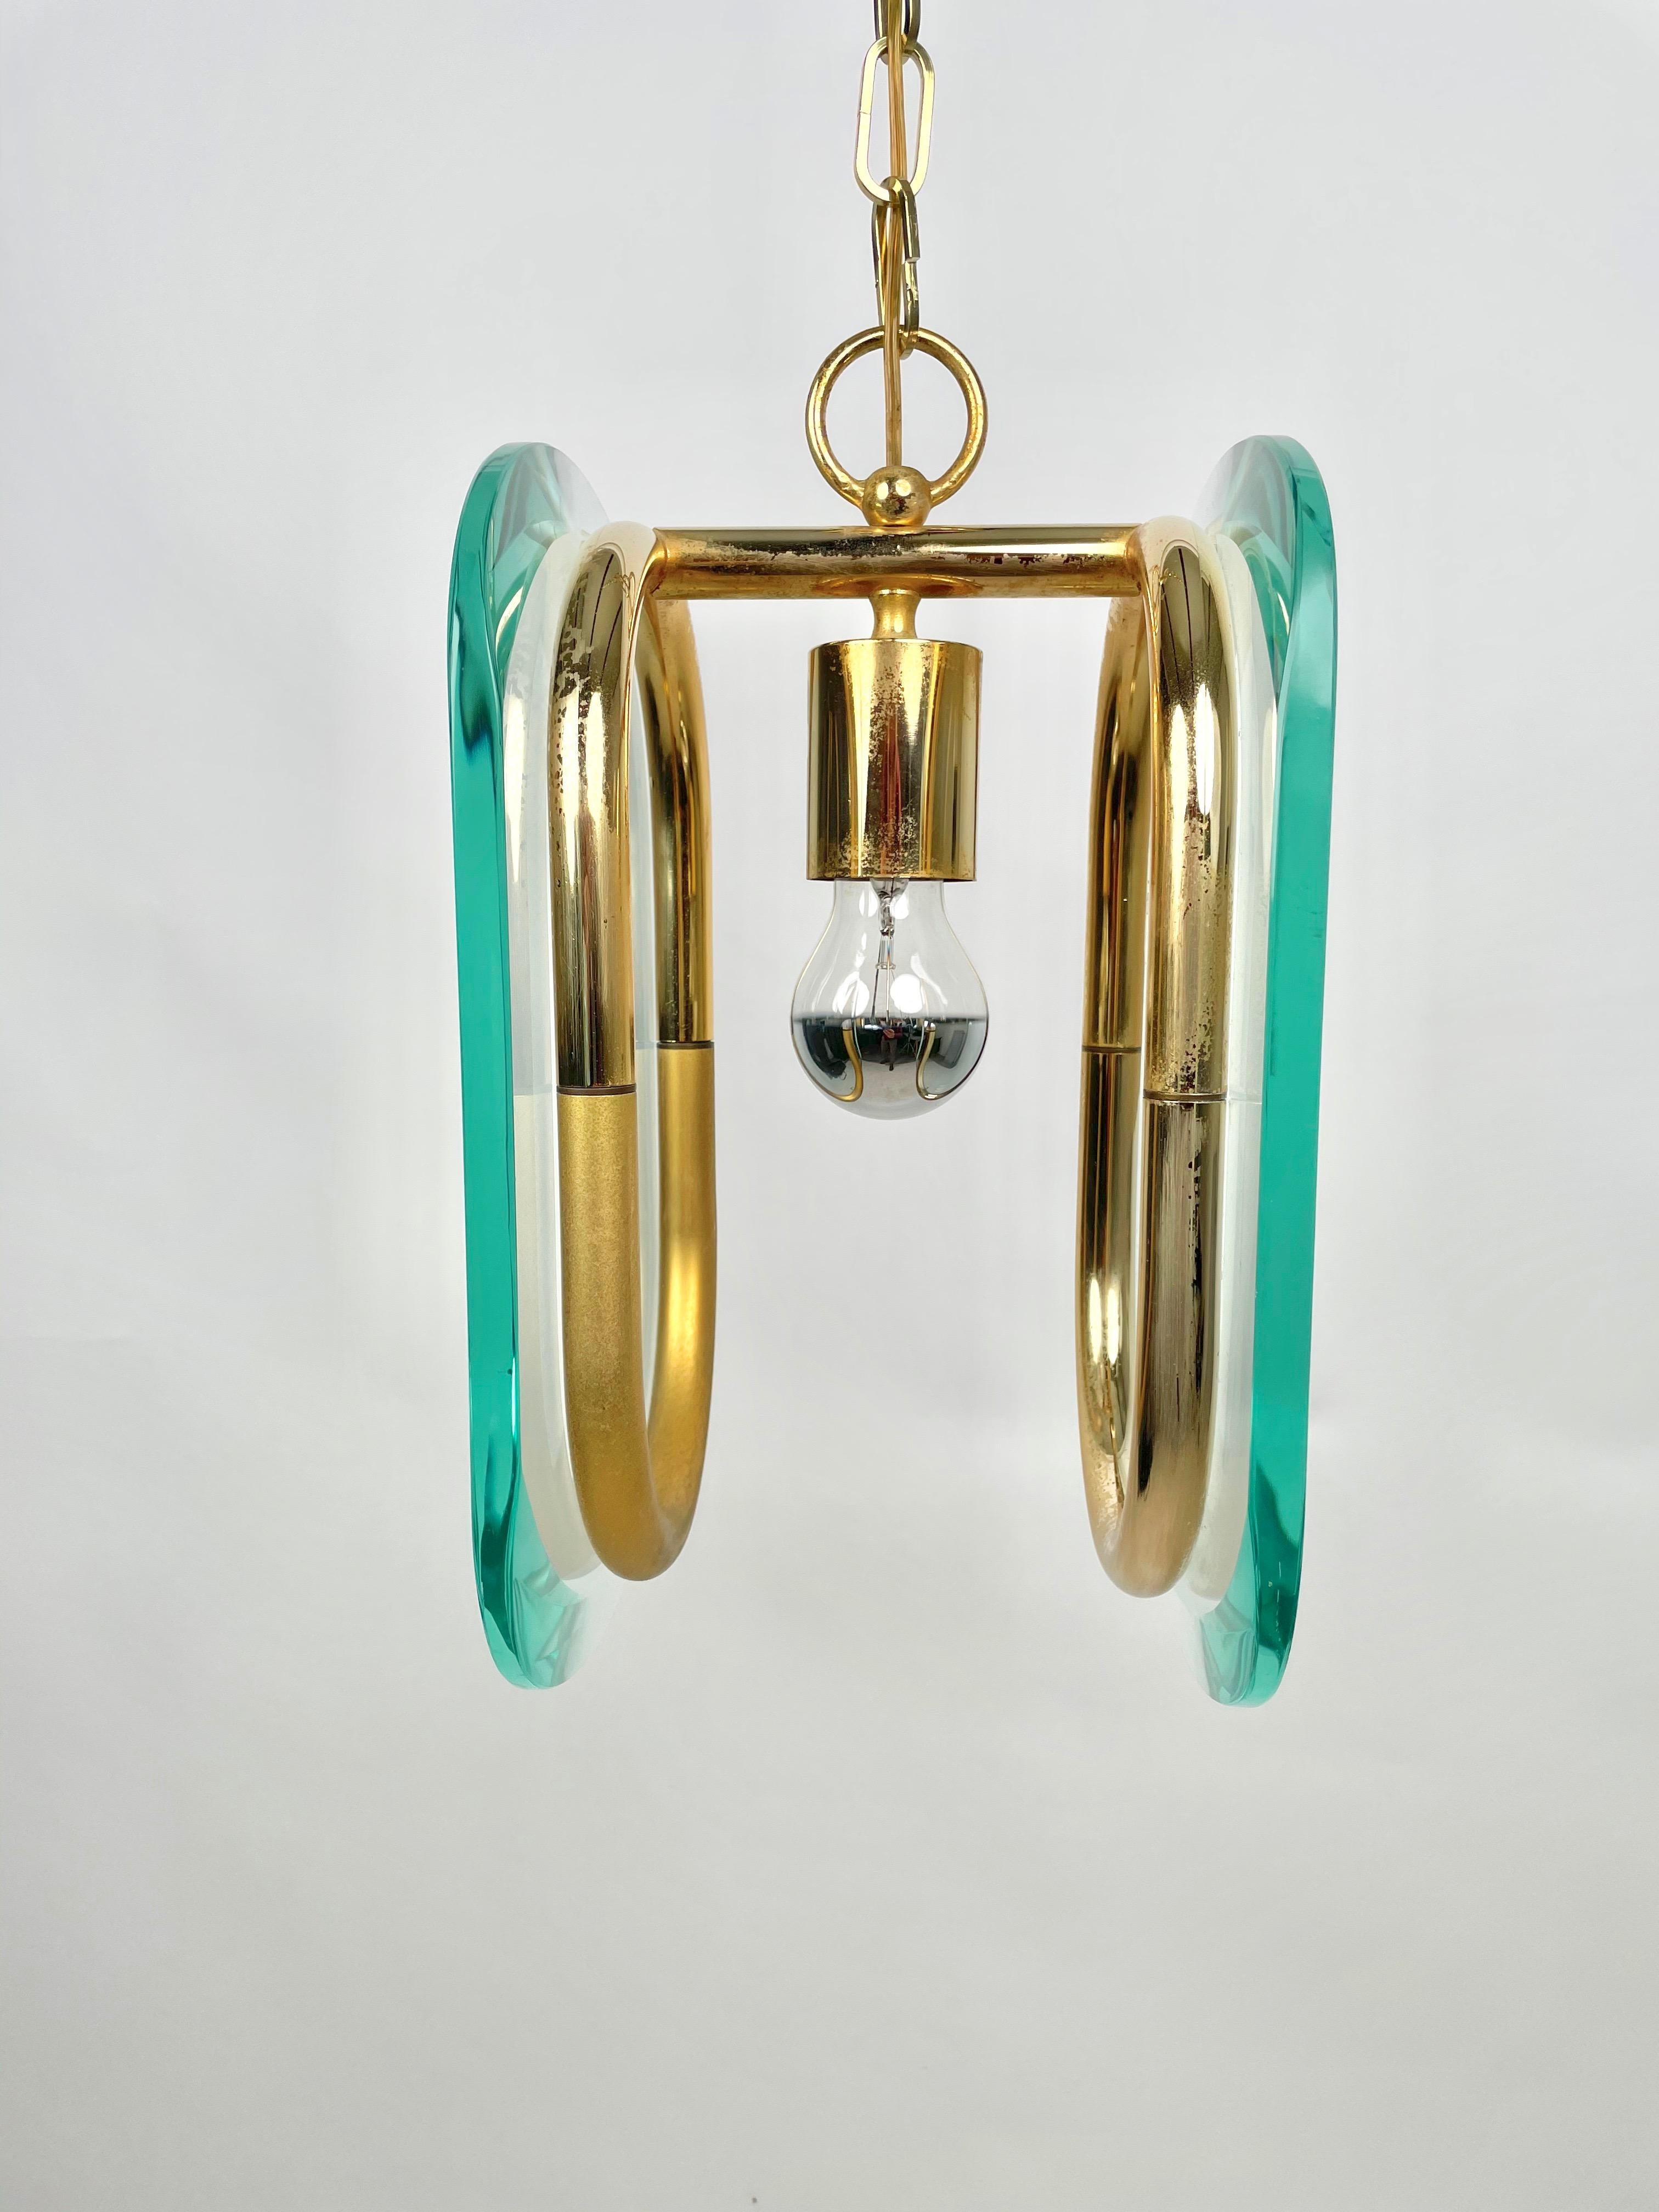 Brass and Glass Chandelier Fontana Arte Style, Italy, 1970s For Sale 1